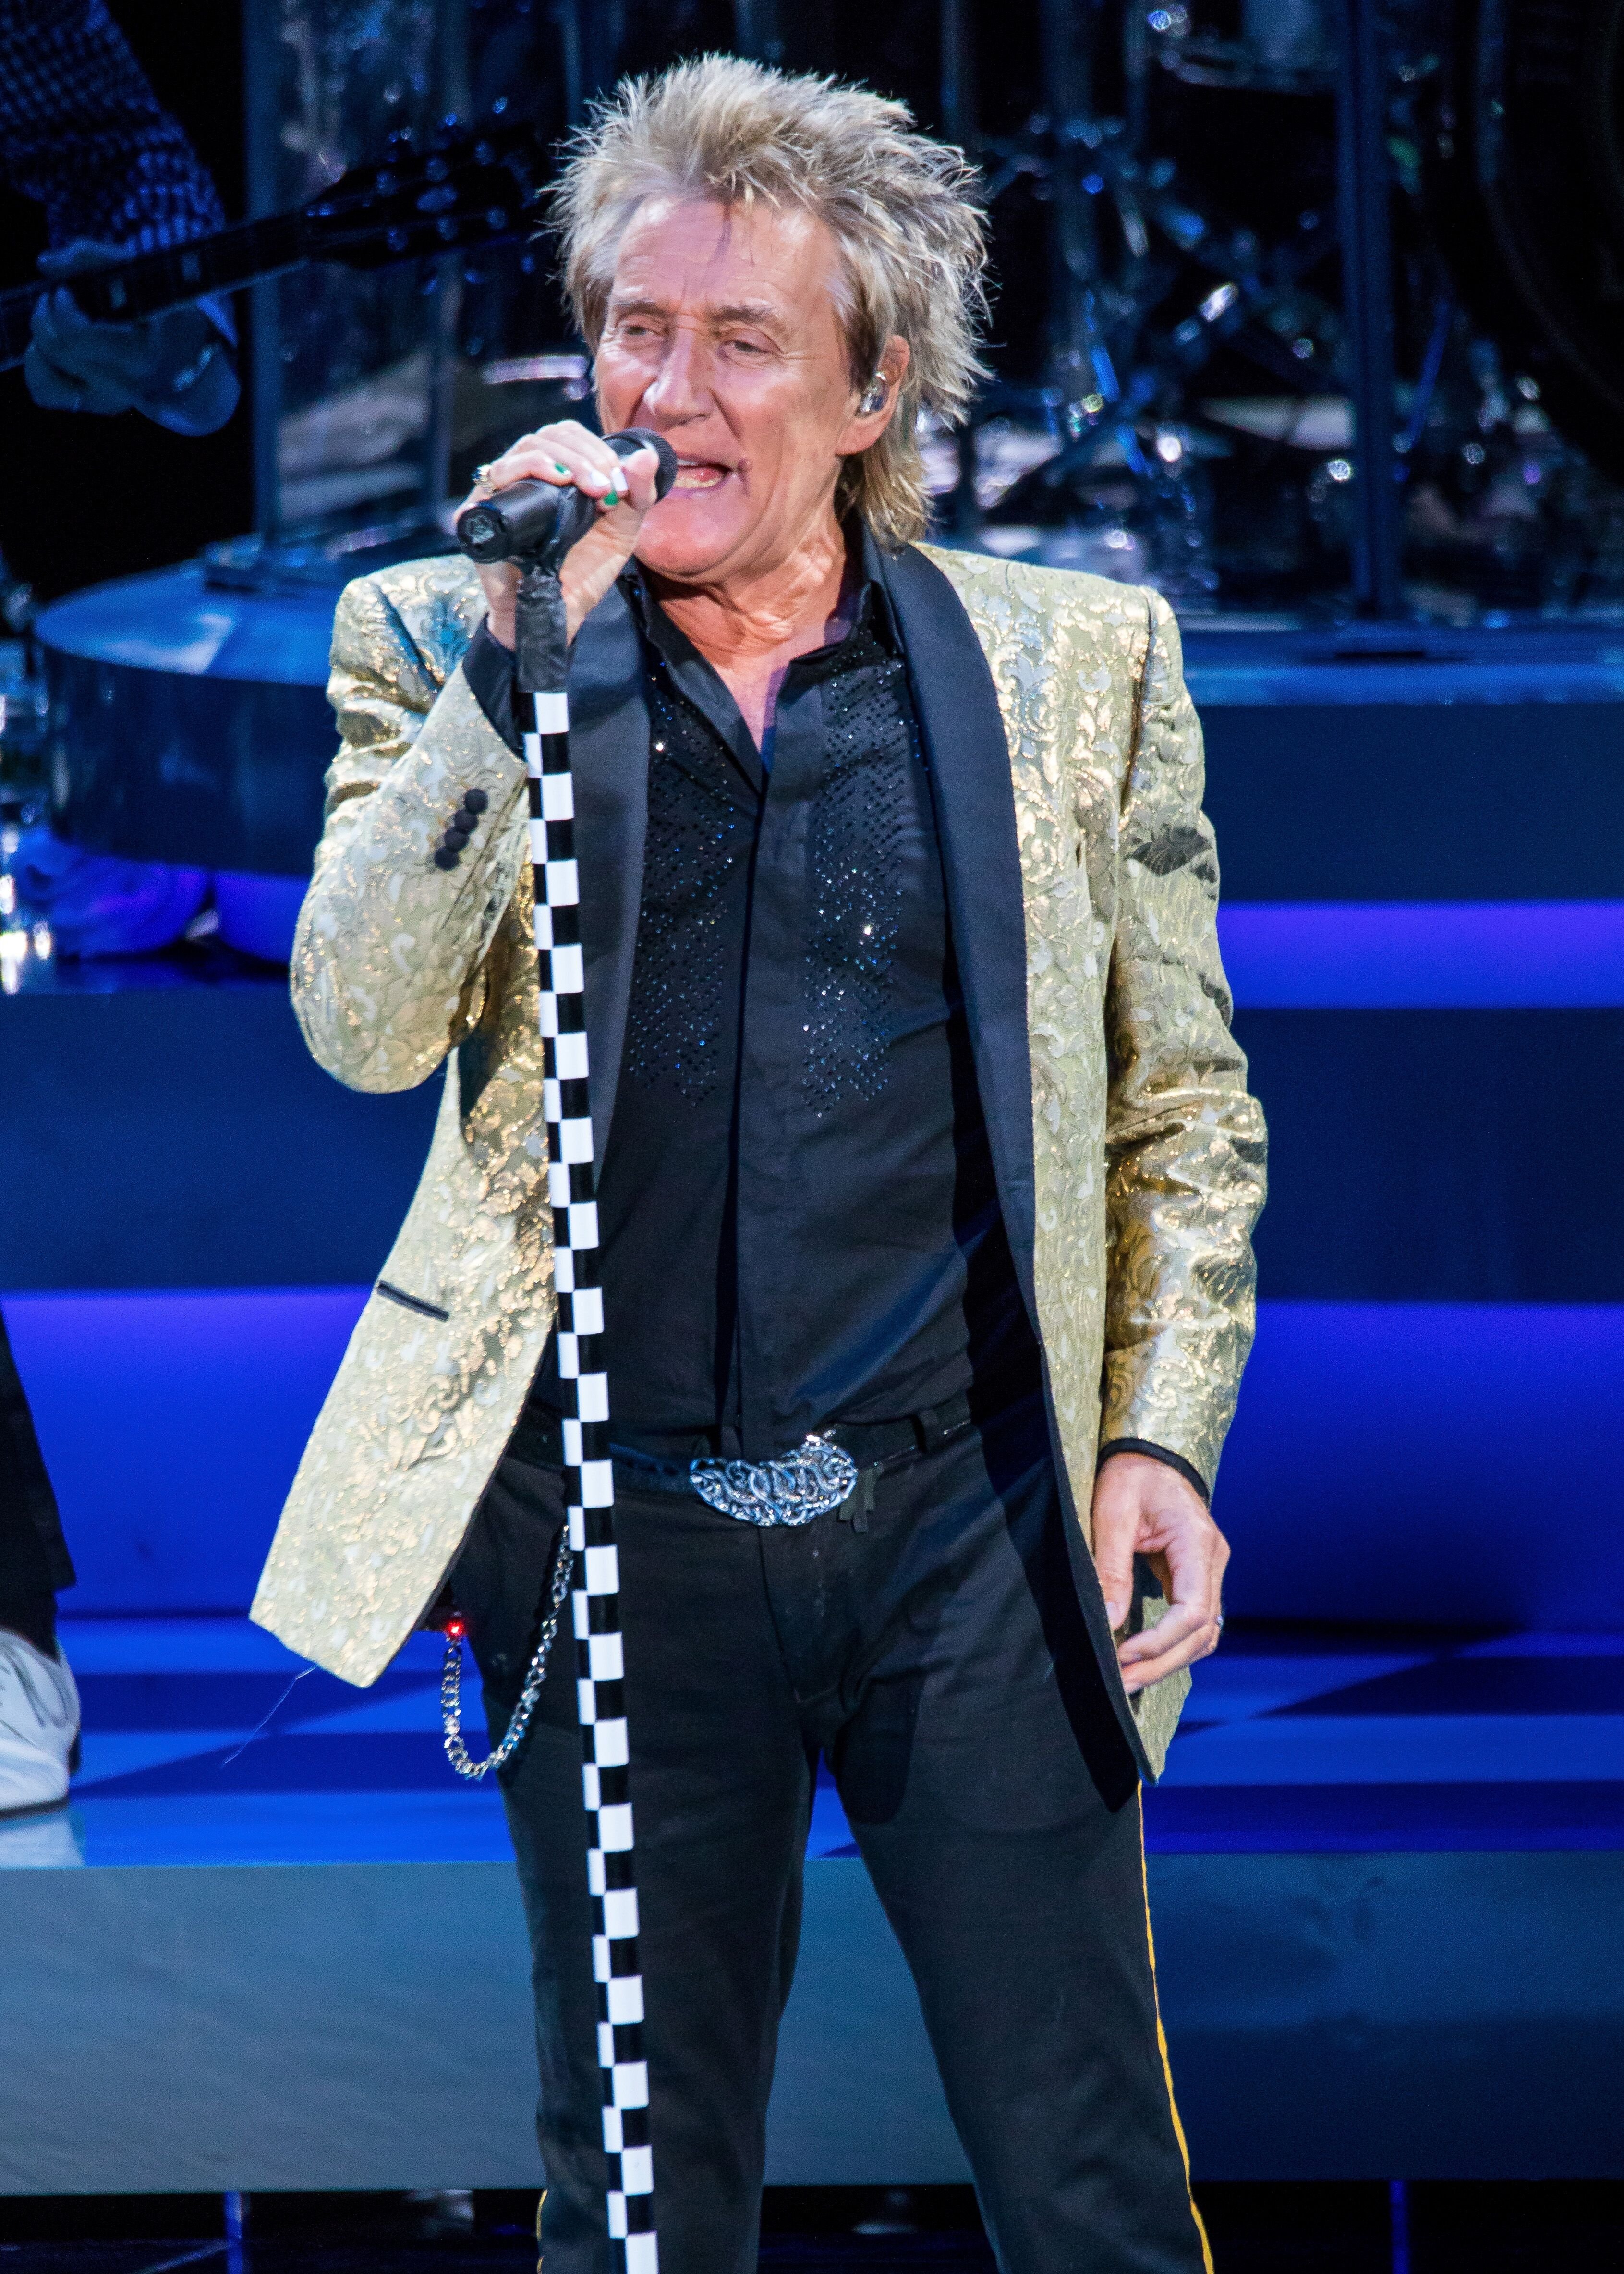 Rod Stewart at DTE Energy Music Theater in 2017 in Clarkston, Michigan | Source: Getty Images